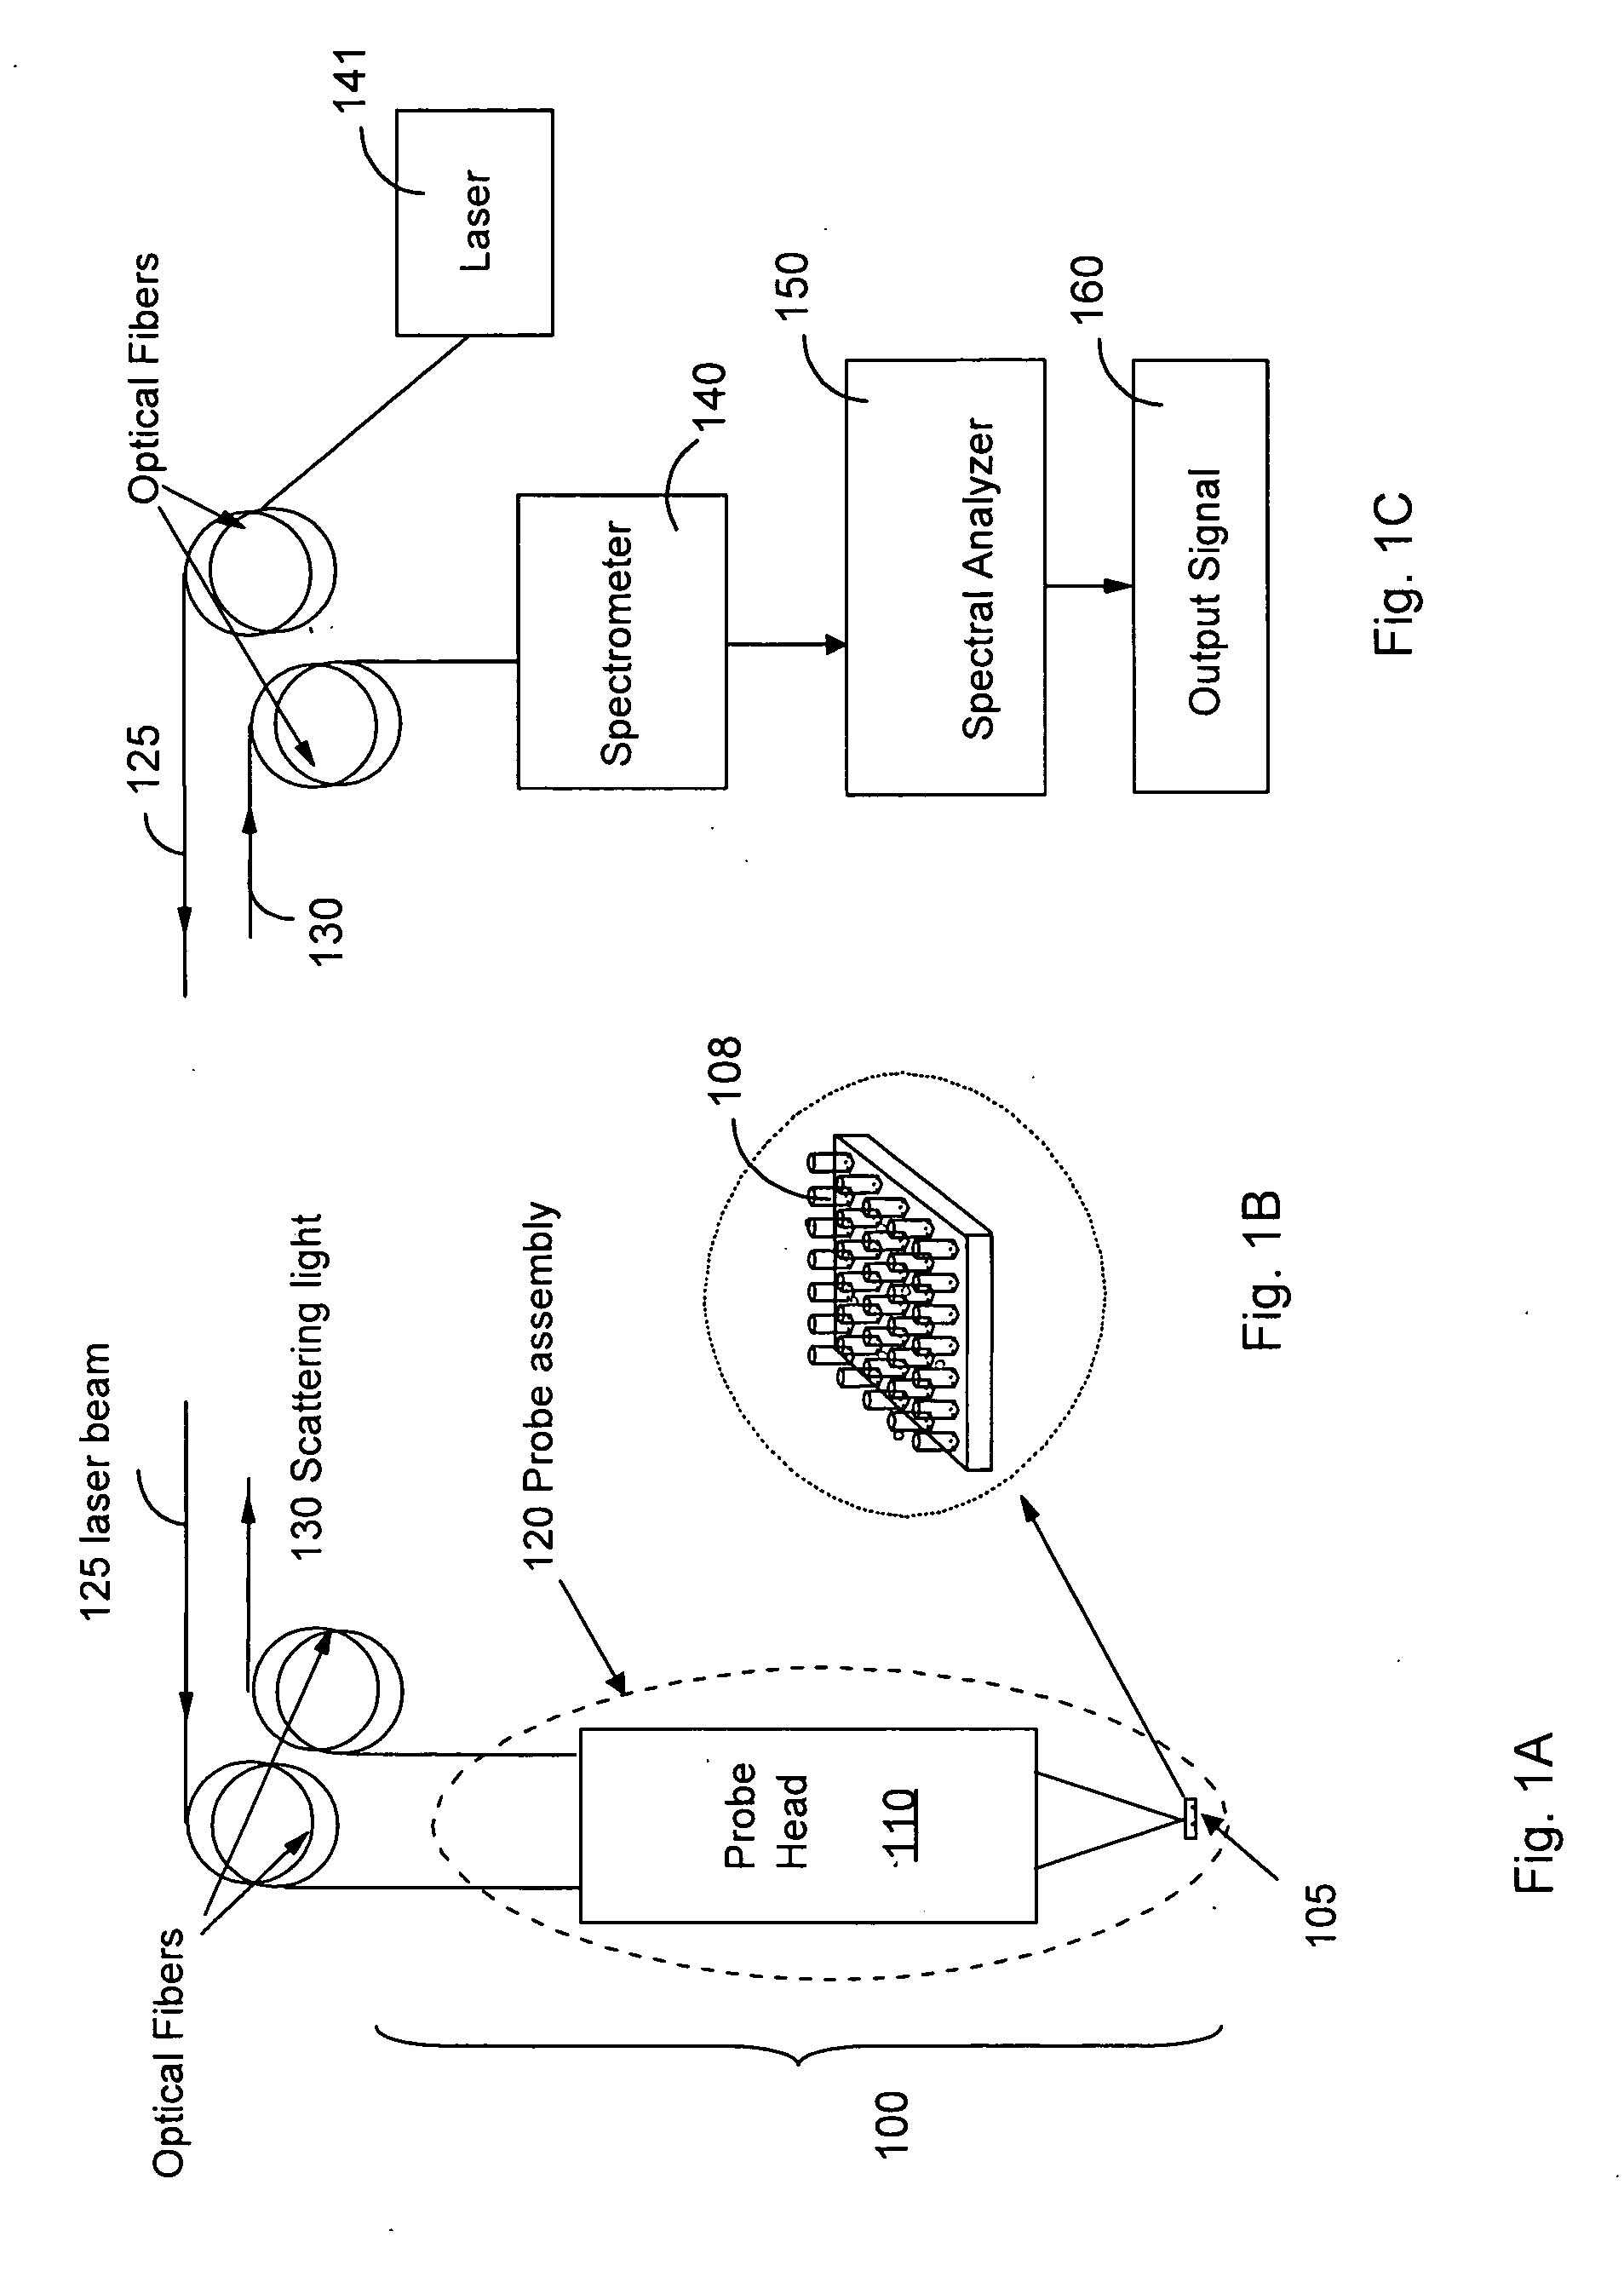 Systems and methods for food safety detection